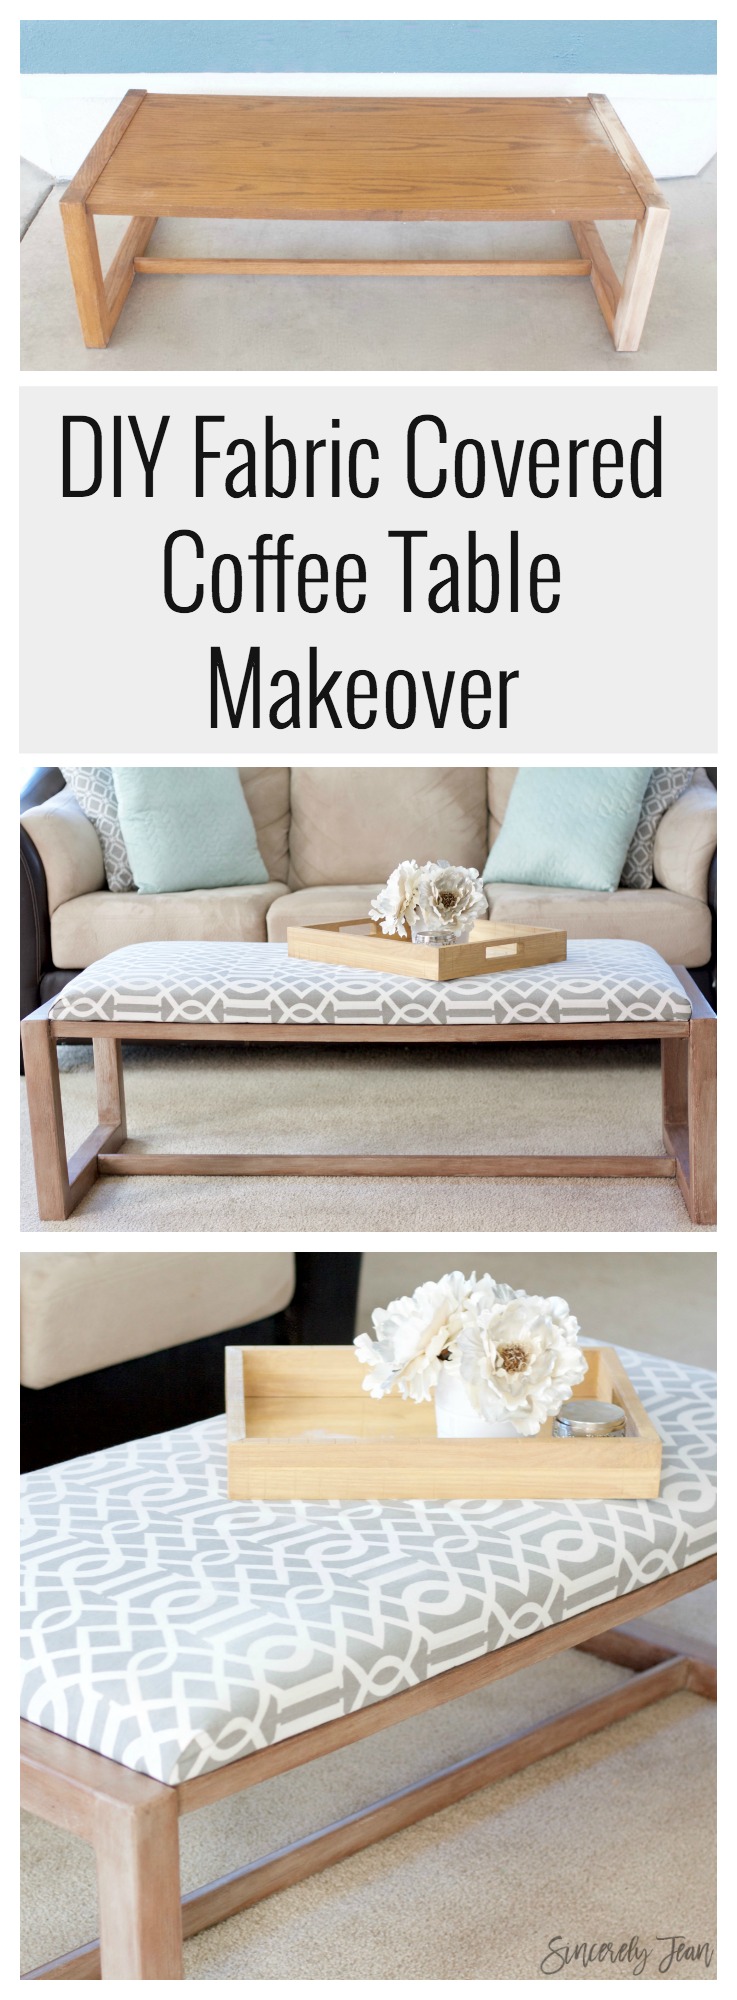 DIY Fabric Covered Coffee Table Makeover - Sincerely Jean